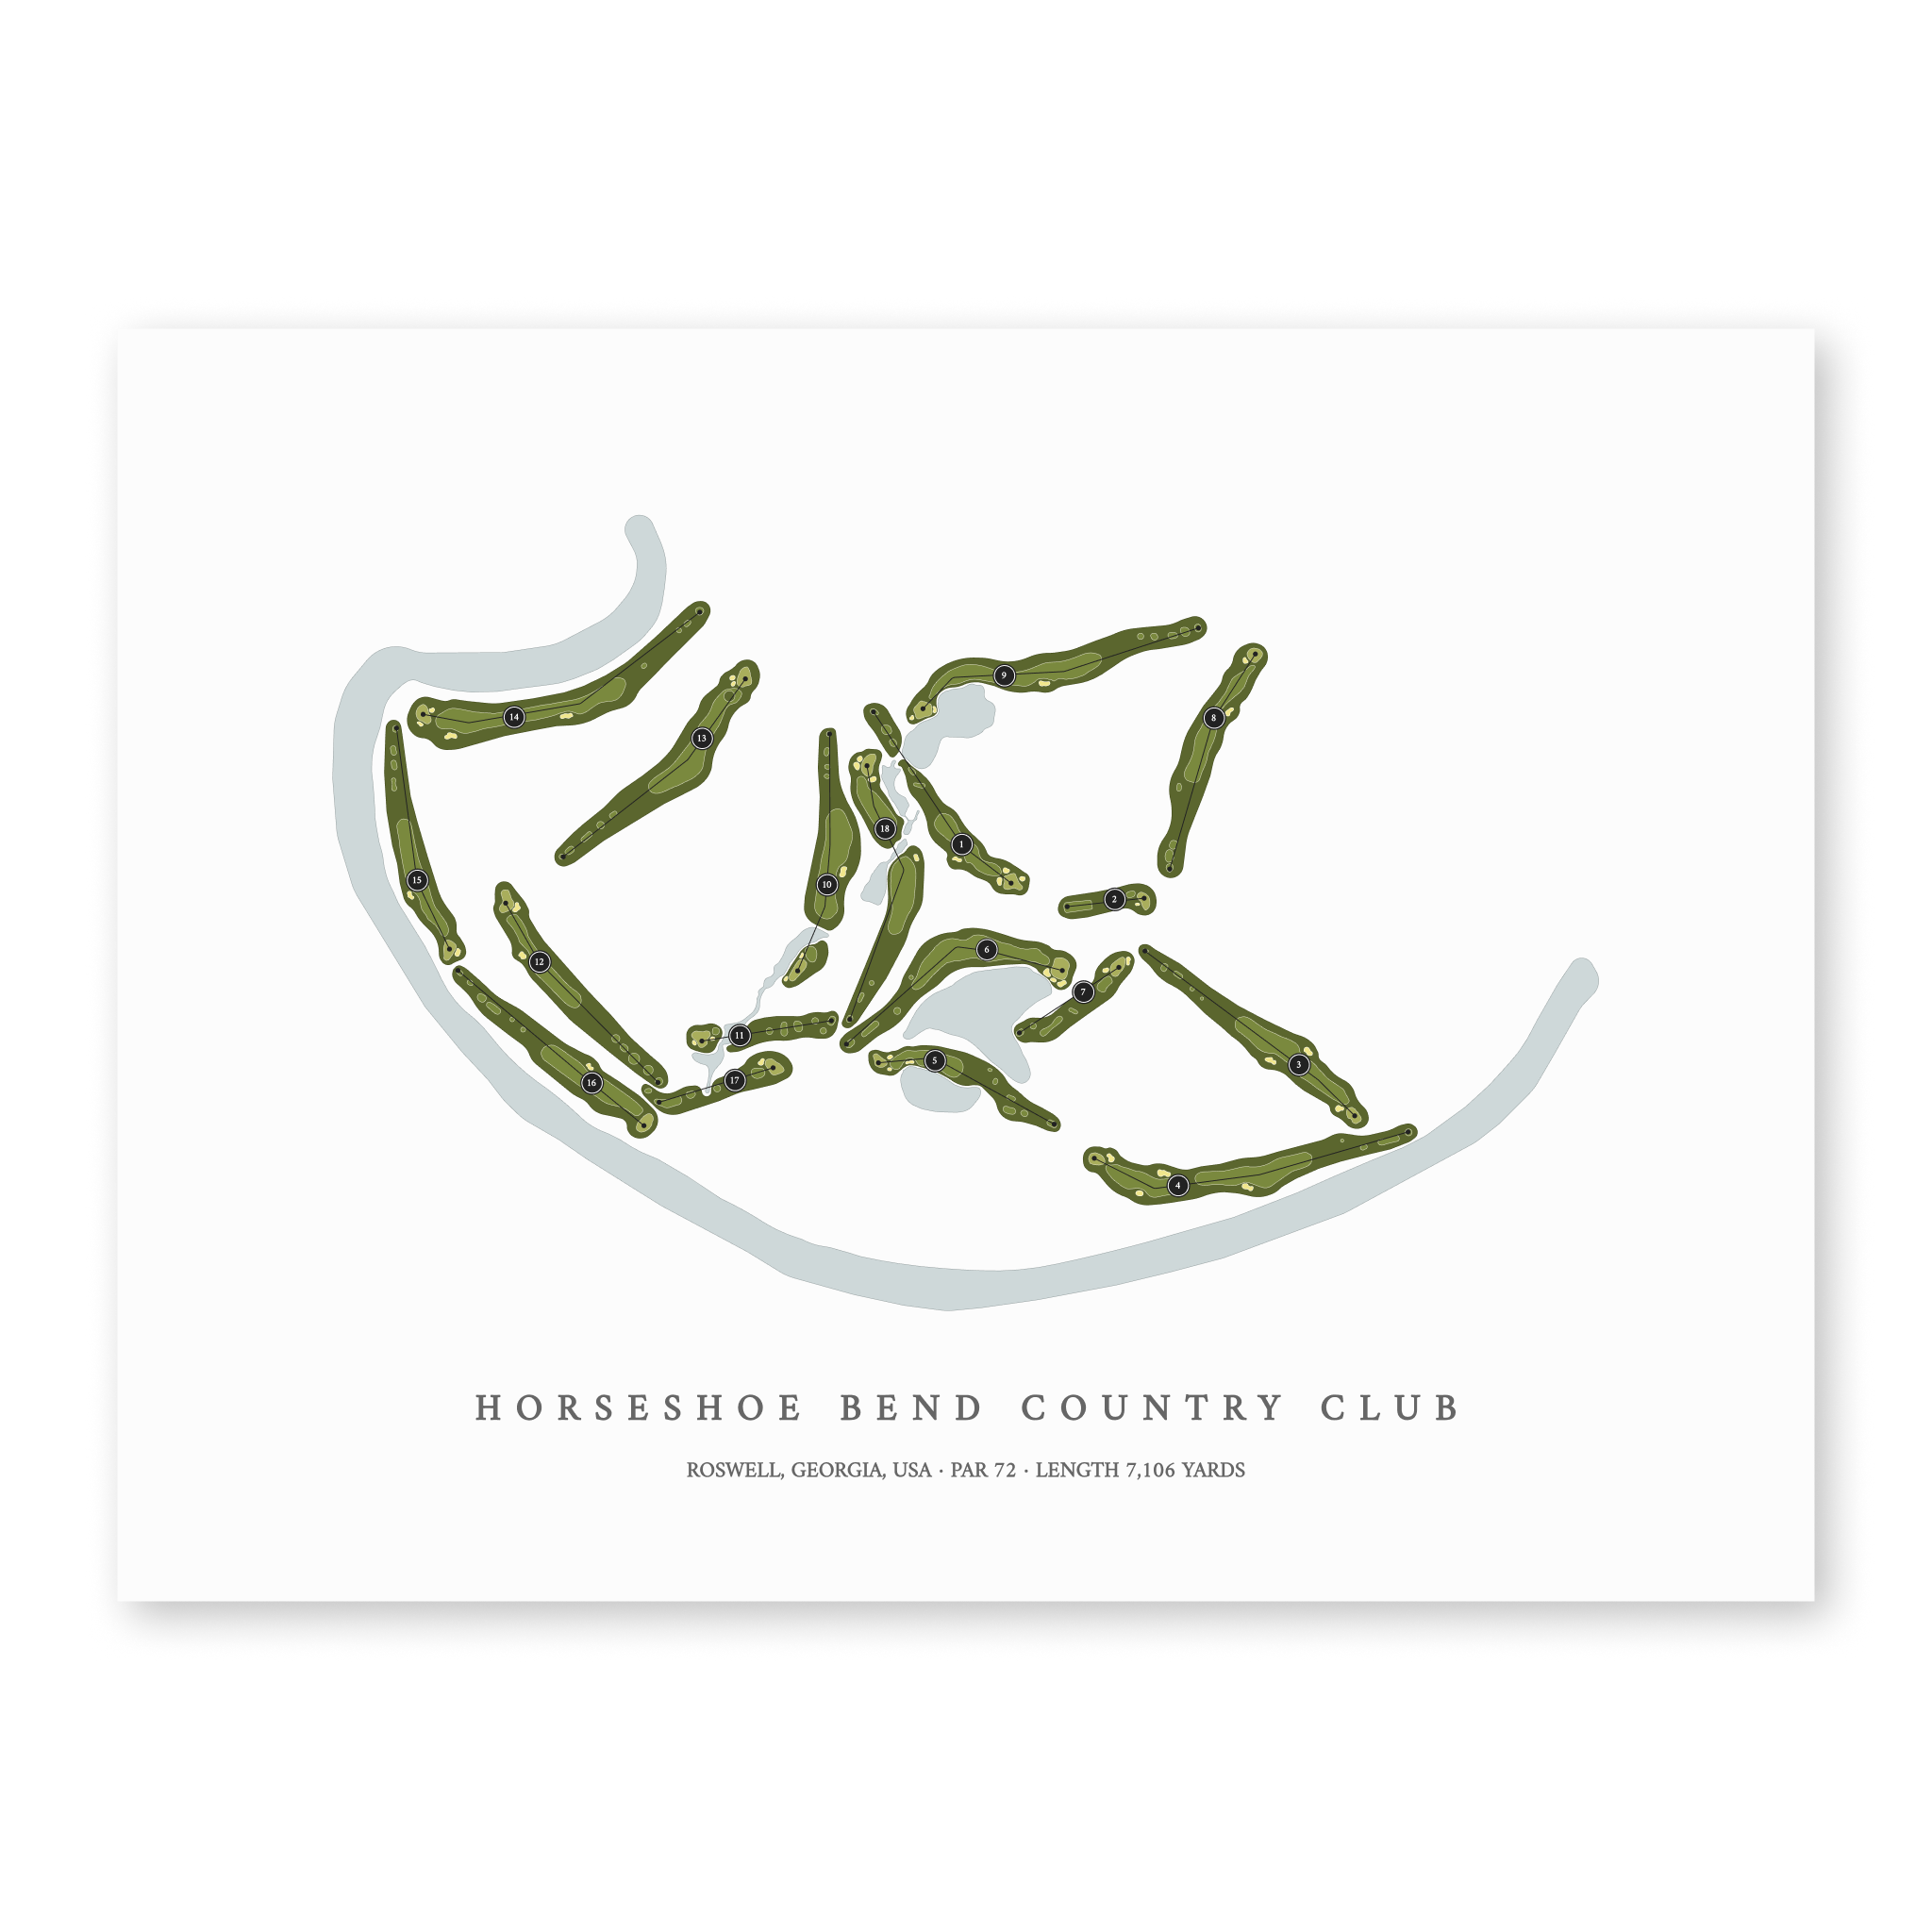 Horseshoe Bend Country Club| Golf Course Print | Unframed With Hole Numbers #hole numbers_yes